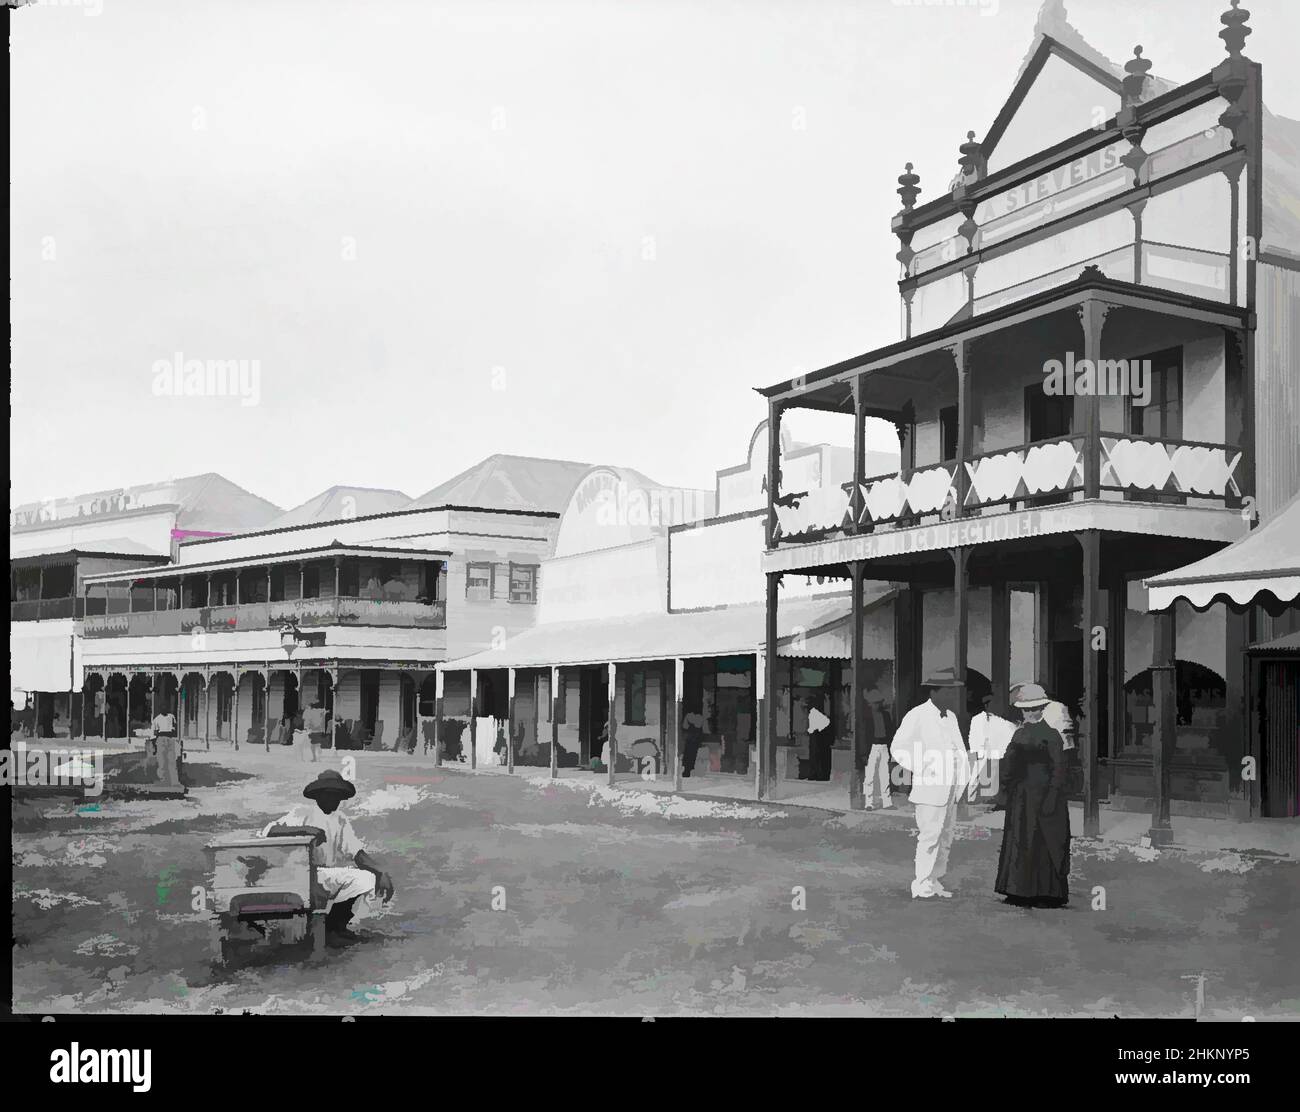 Art inspired by Suva, Fiji, Burton Brothers studio, photography studio, 1884, New Zealand, gelatin dry plate process, A populated Suva street lined with businesses. Two of these were established in 1882, just two years before Burton took this photograph. The shops reflect the needs of a, Classic works modernized by Artotop with a splash of modernity. Shapes, color and value, eye-catching visual impact on art. Emotions through freedom of artworks in a contemporary way. A timeless message pursuing a wildly creative new direction. Artists turning to the digital medium and creating the Artotop NFT Stock Photo